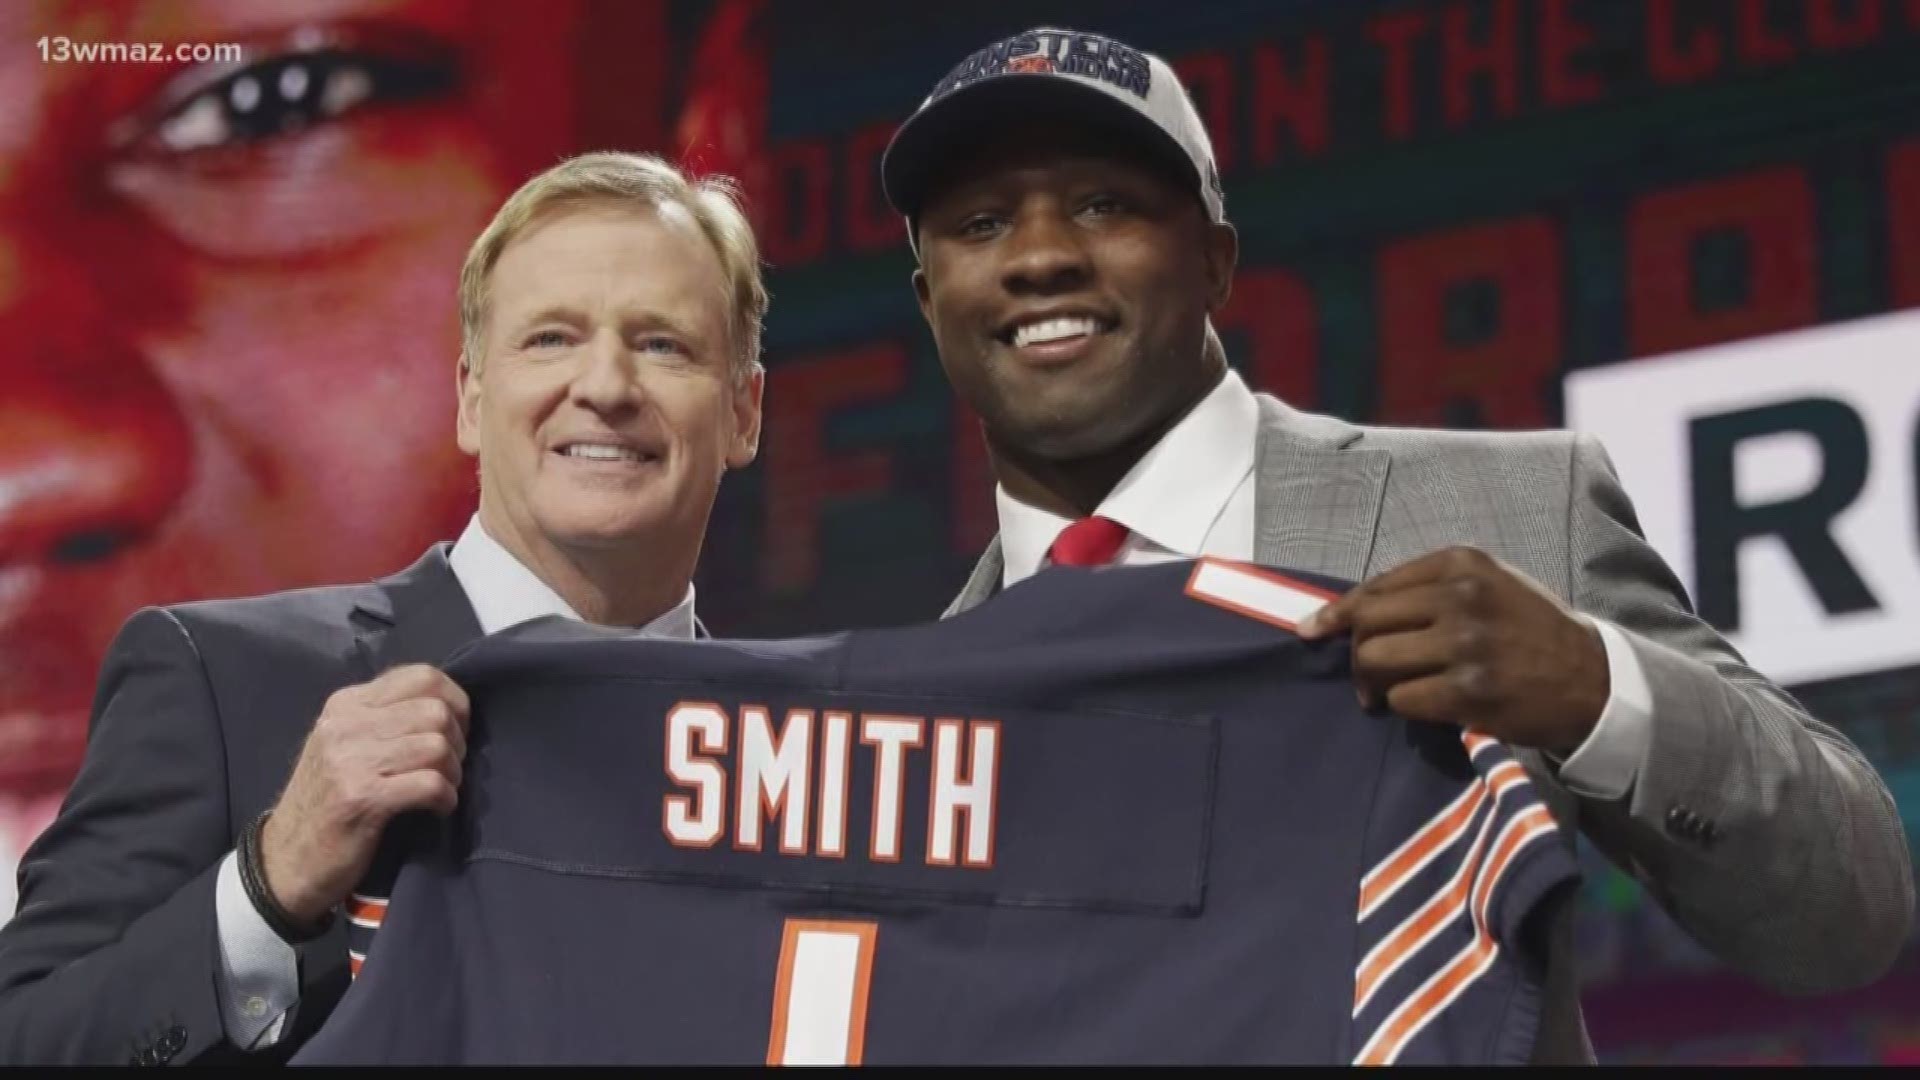 Roquan Smith, the Chicago Bears NFL linebacker got his start learning the game of football in Central Georgia.